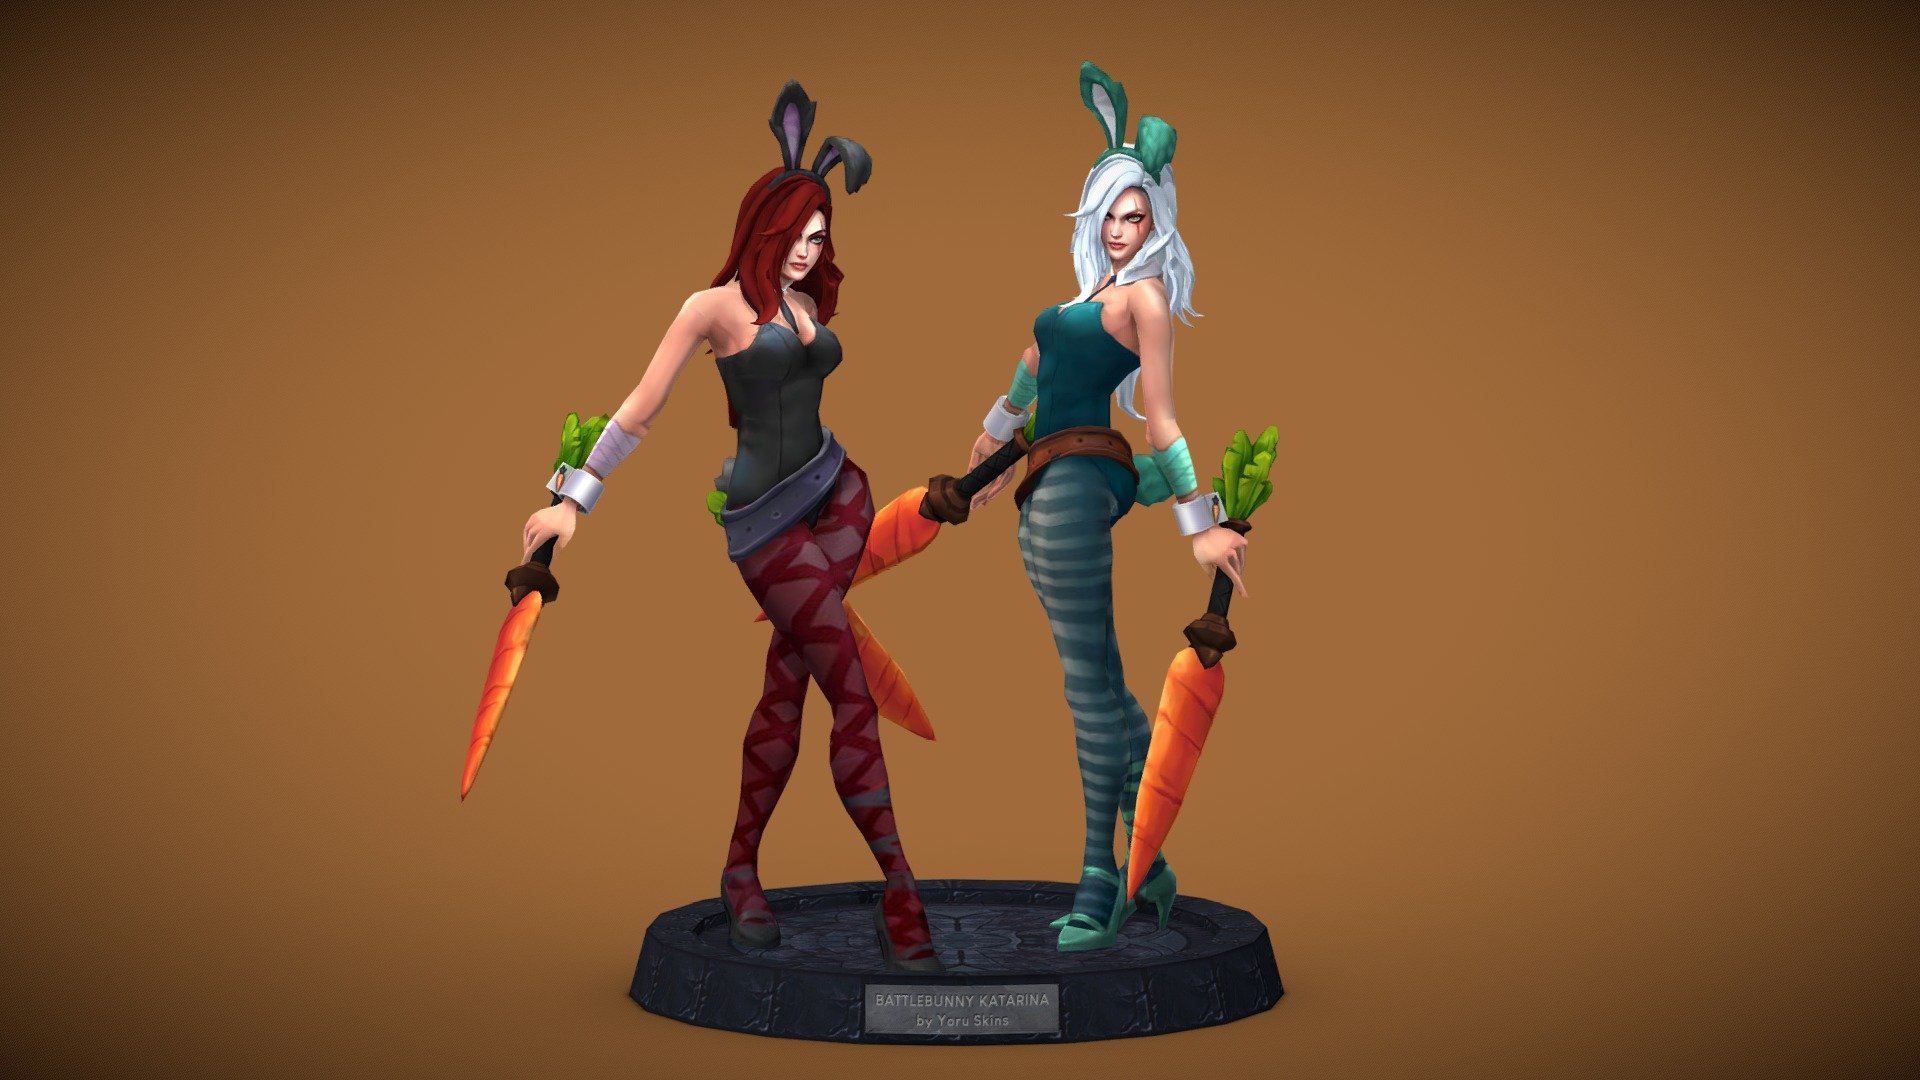 My Battlebunny Katarina custom skin for League of Legends.
----------------------------------------­­­­­­-----------
Download on Killerskins: https://killerskins.com/yoru/champions/battlebunny-katarina/
Direct Download: https://bit.ly/battlebunny-katarina
----------------------------------------­­­­­­-----------
Done with Maya 2018 and Photoshop.
Parts used: Battlebunny Riven, Cottontail Fizz, Battle Queen Katarina, Wild Rift Miss Fortune Default © Riot Games - Battlebunny Katarina | LoL Custom Skin - 3D model by Yoru Skins (@YoruSkins) 3d model